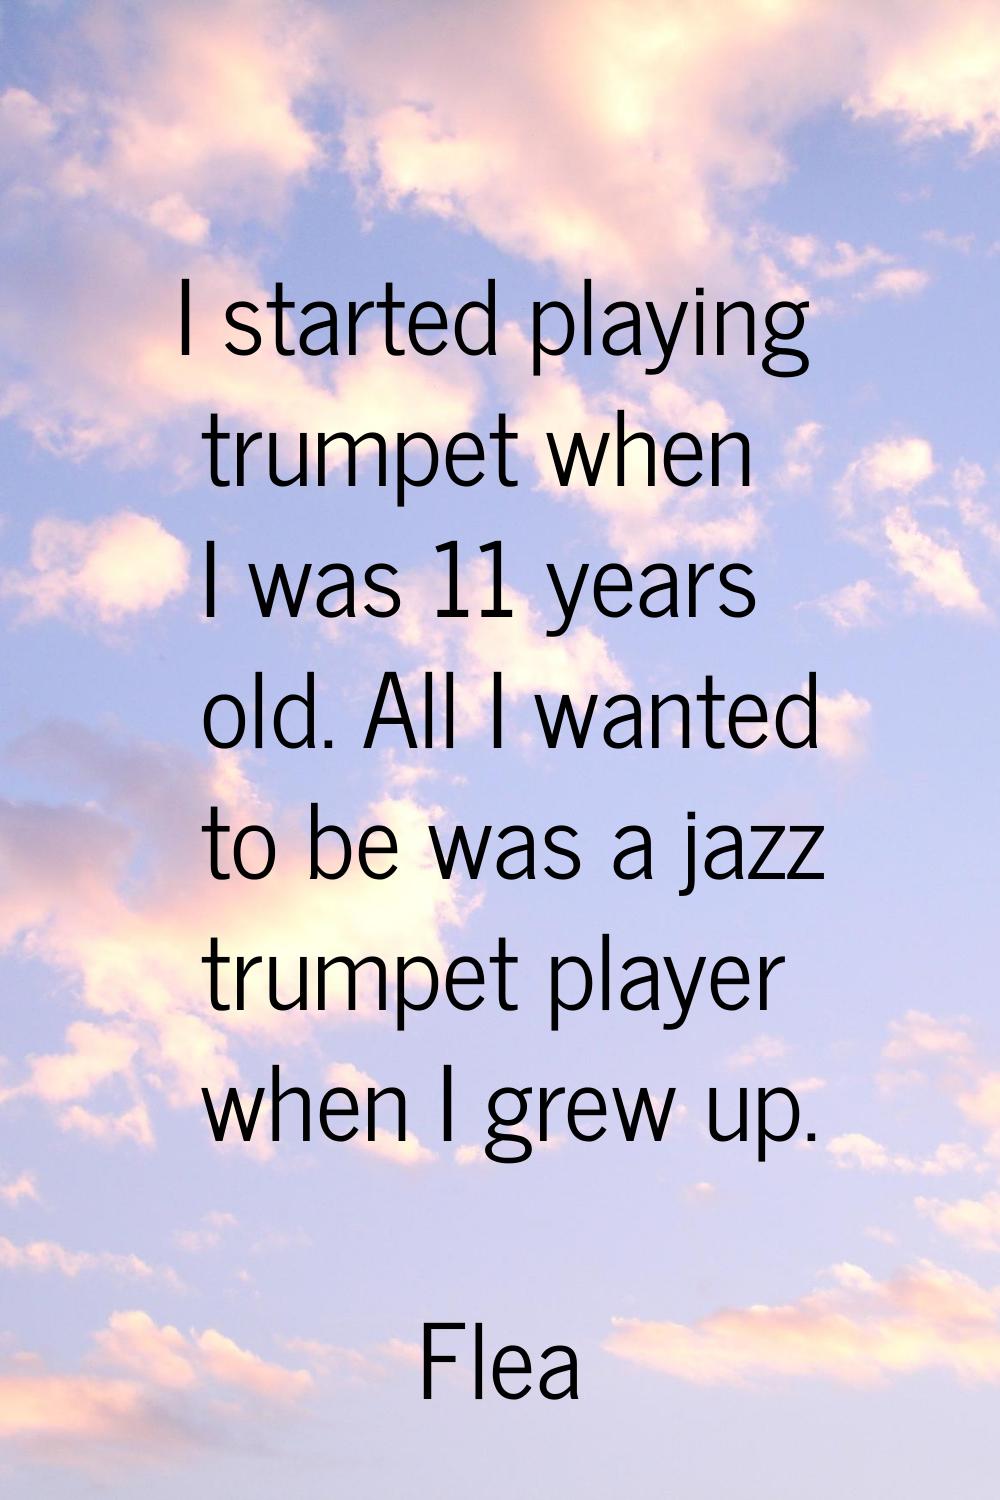 I started playing trumpet when I was 11 years old. All I wanted to be was a jazz trumpet player whe